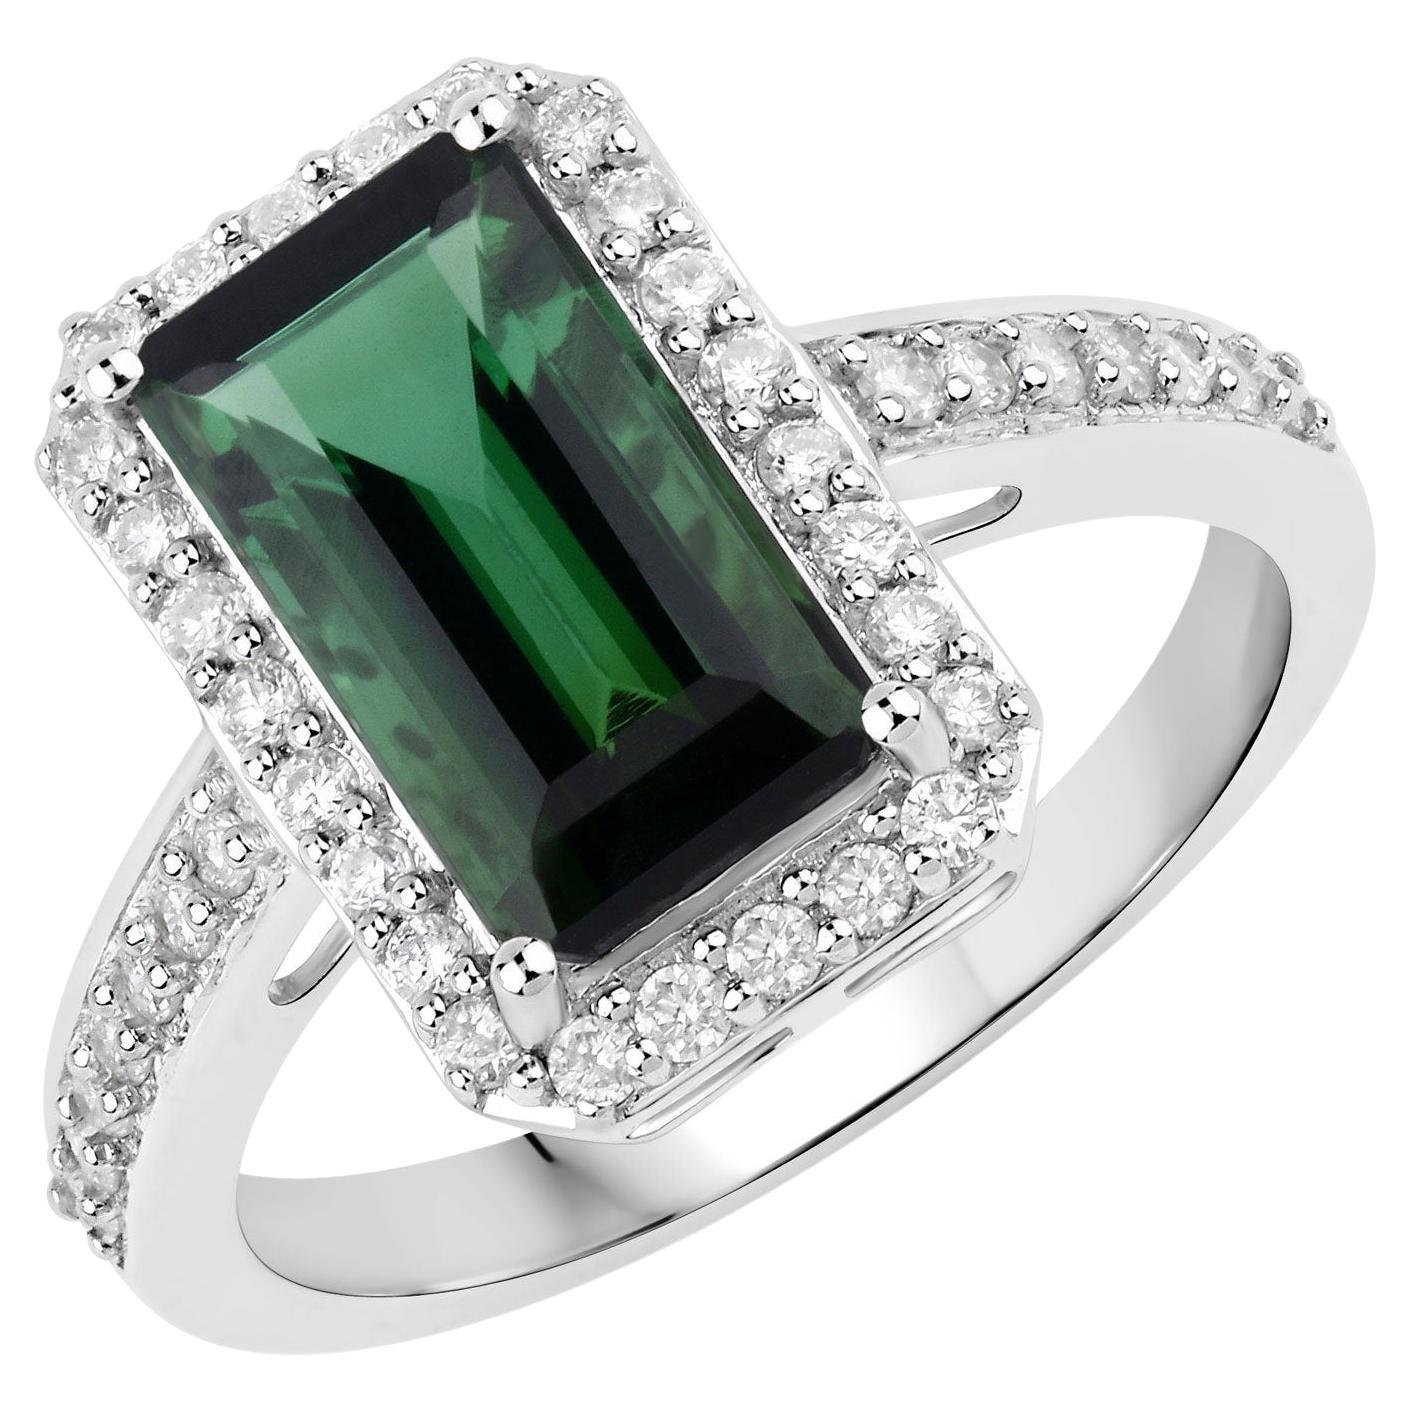 It comes with the appraisal by GIA GG/AJP
Green Tourmaline = 2.65 Carat ( 11.5 x 6.5 mm )
Cut: Emerald
Diamonds = 0.40 Carats
Diamonds Quantity: 40
Metal: 14K White Gold
Ring Size: 7* US
*It can be resized complimentary